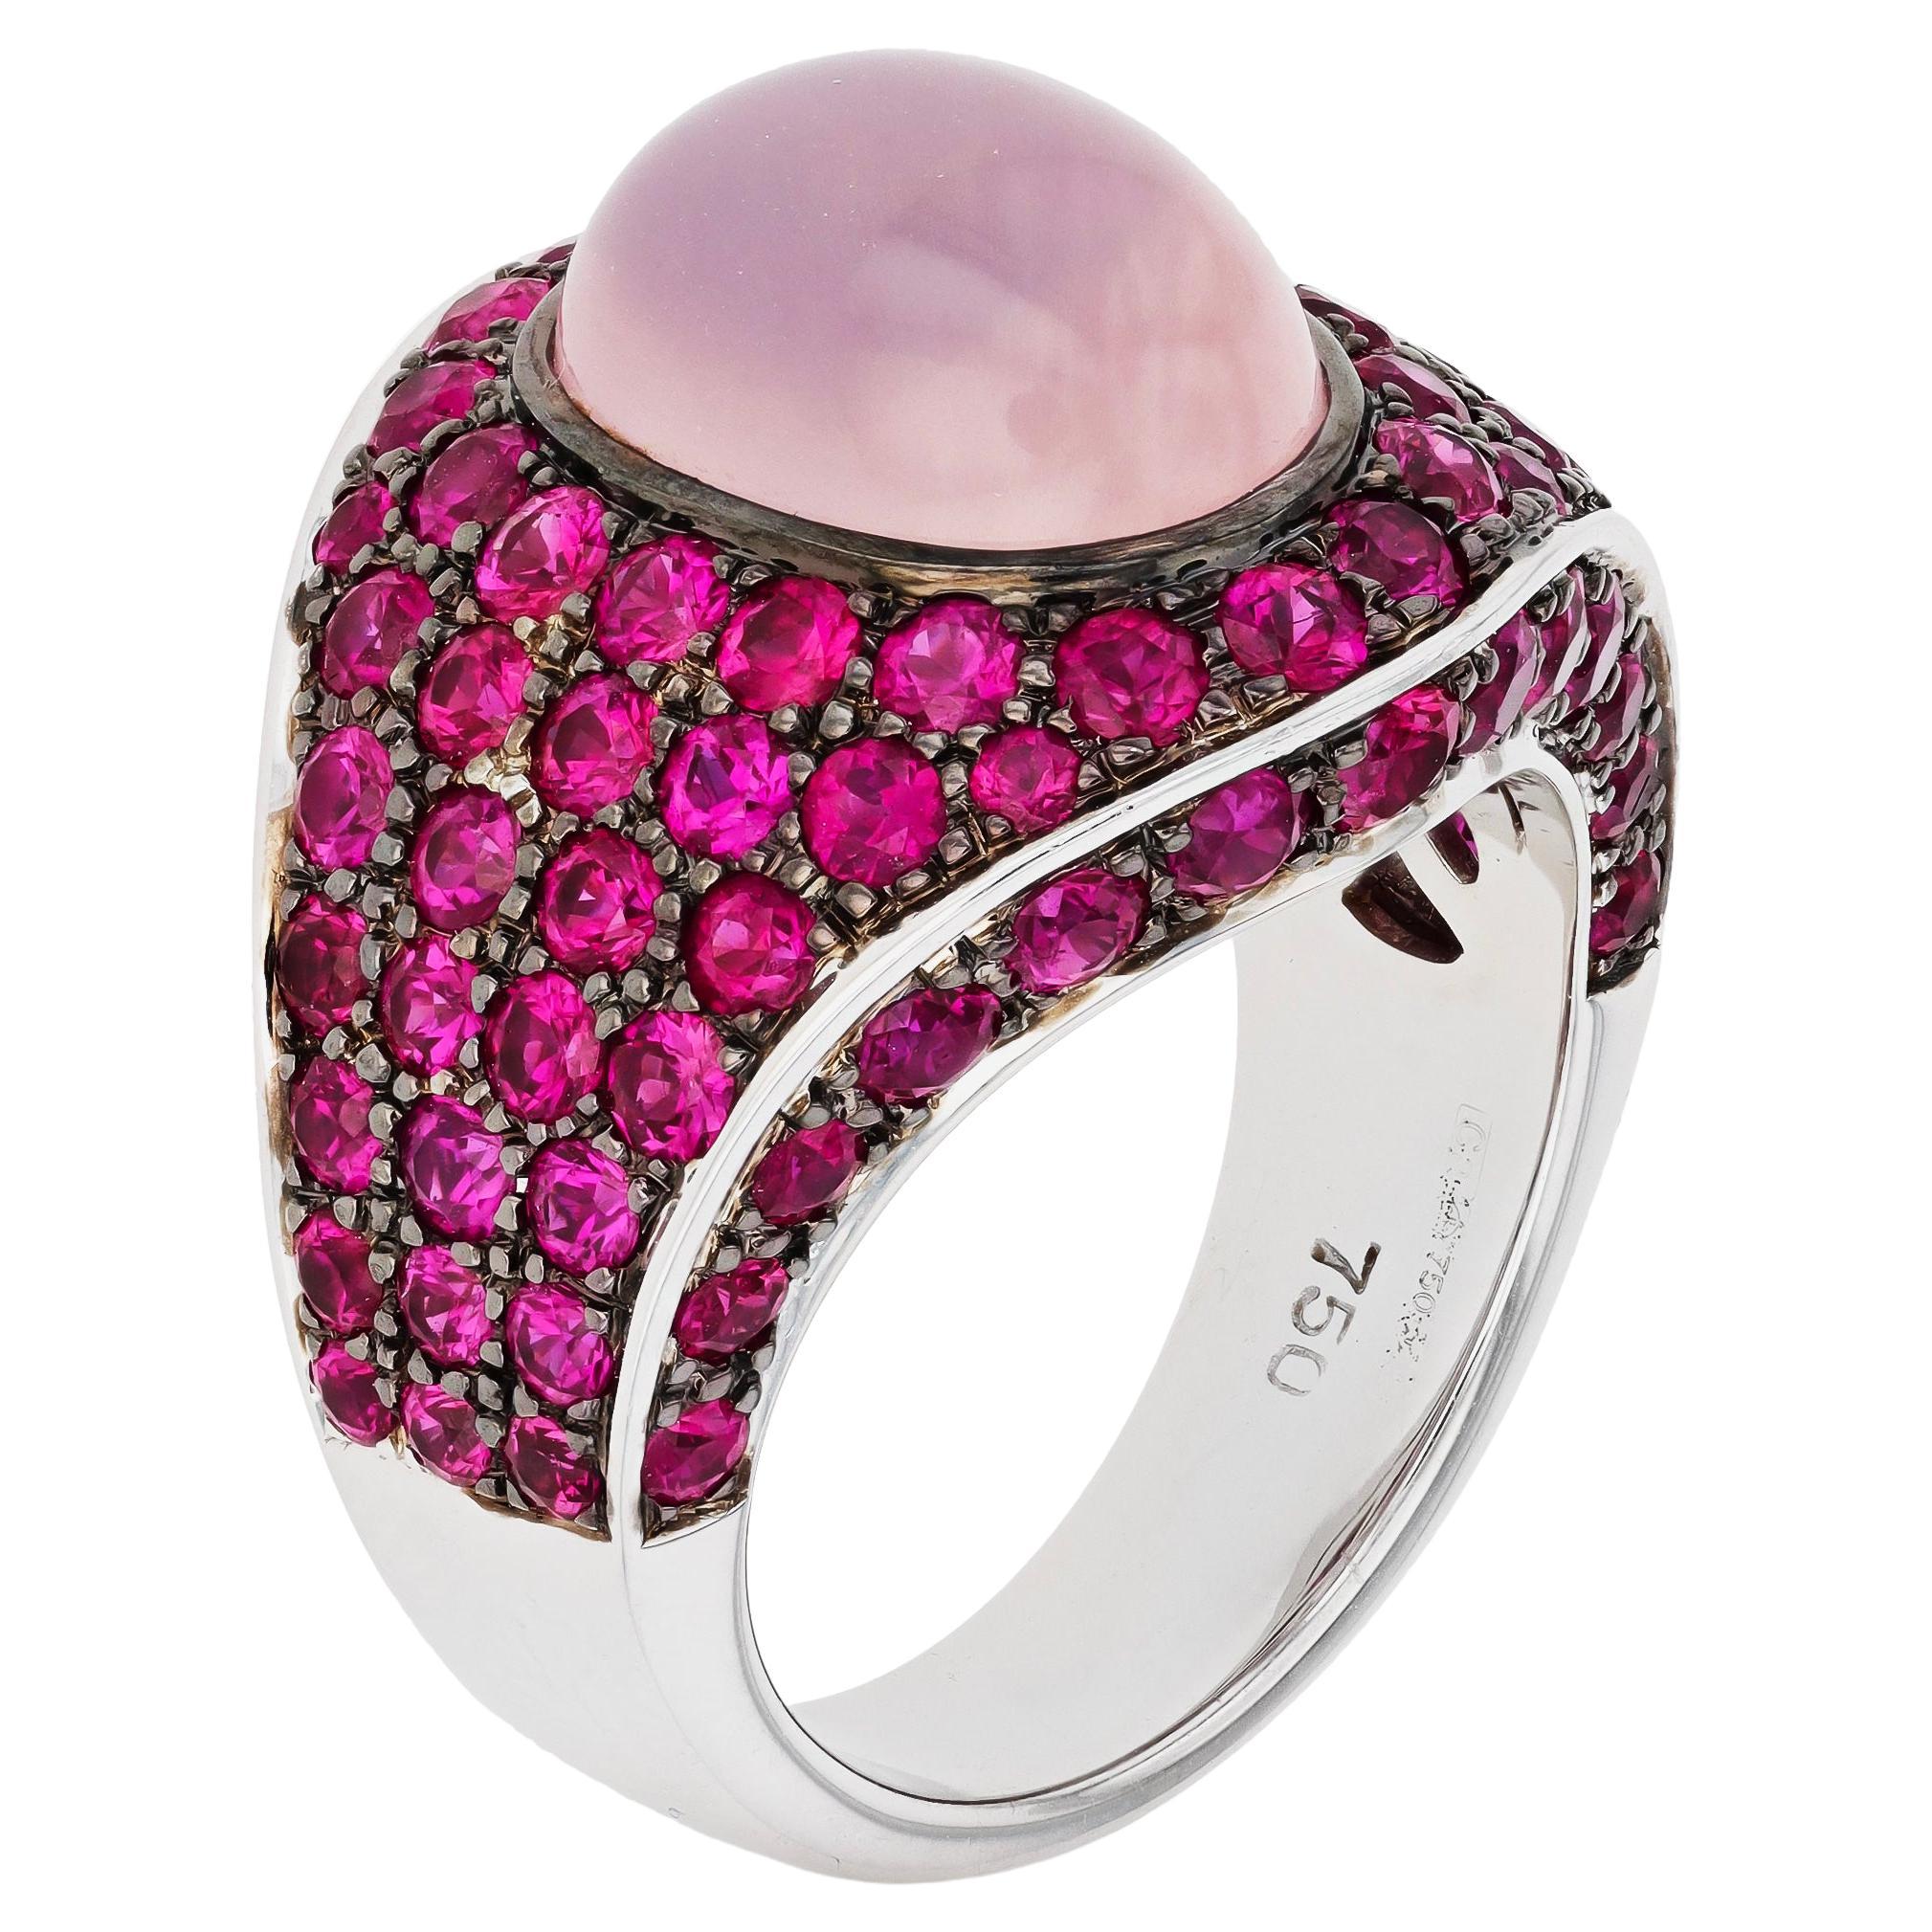 Roberto Coin 18K White Gold, Pink Quartz, and Ruby Ring sz 7 For Sale